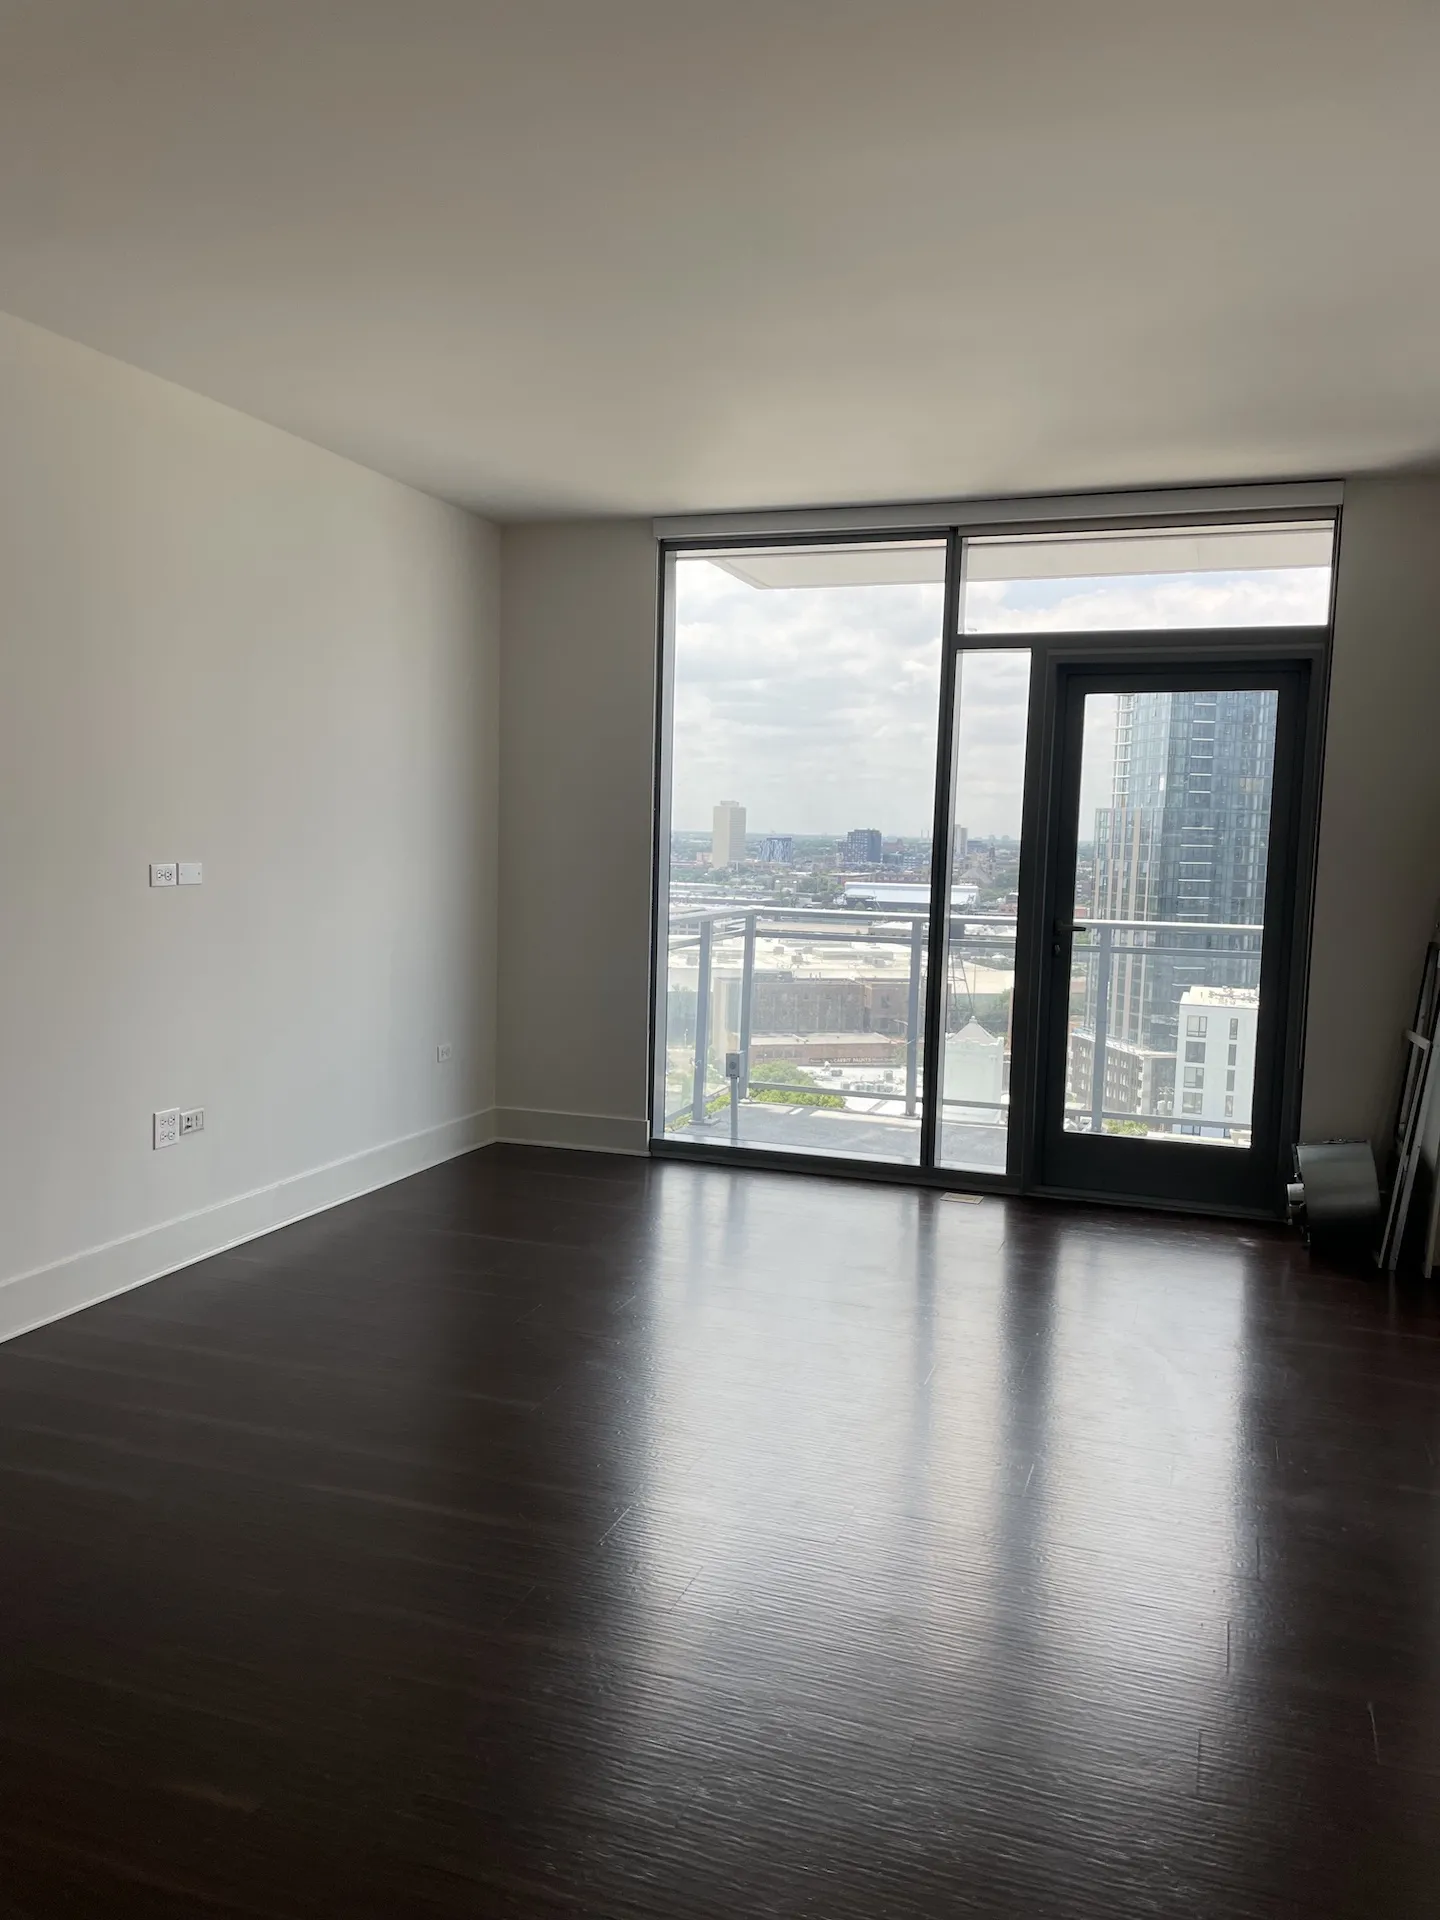 1457 N HALSTED ST 60642-unit#813-Chicago-IL